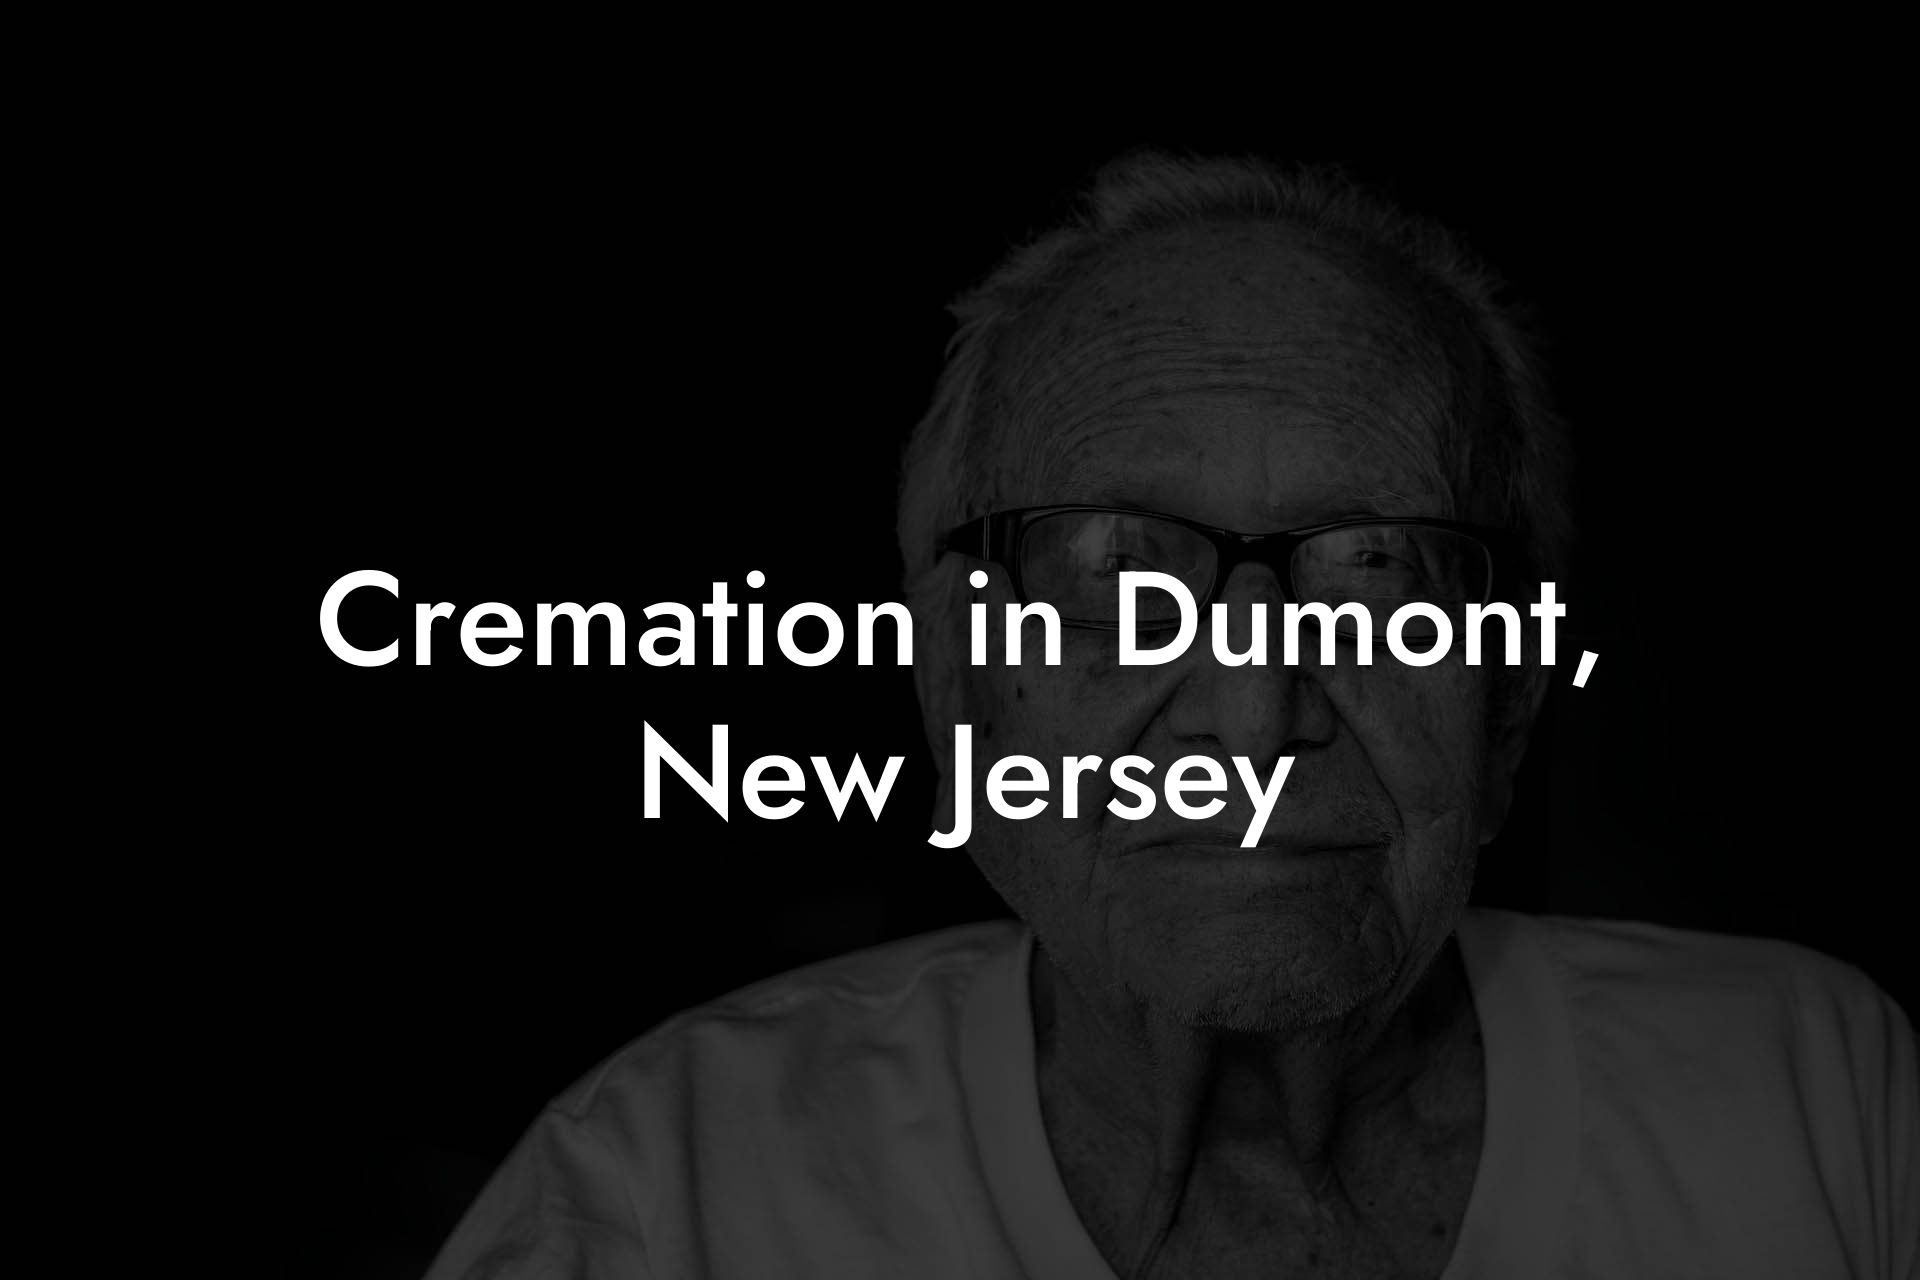 Cremation in Dumont, New Jersey